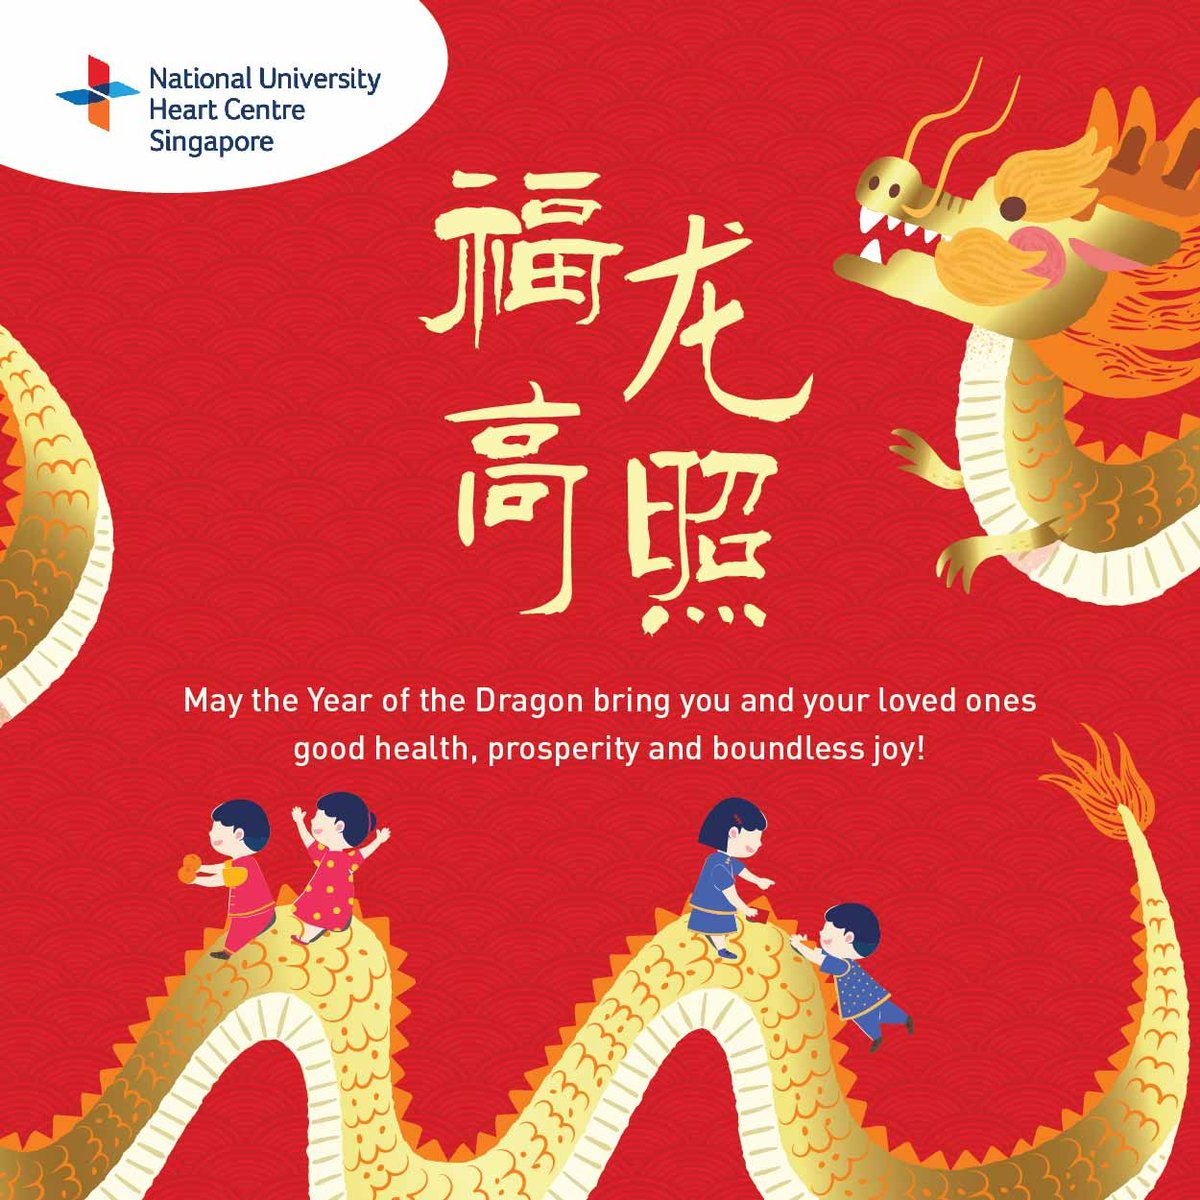 From all of us at #NUHCS, wishing you and your family a joyous Lunar New Year of the Dragon filled with good health, abundance and (龙)loong-evity!🐉  

#LNY2024 #Gongxifacai